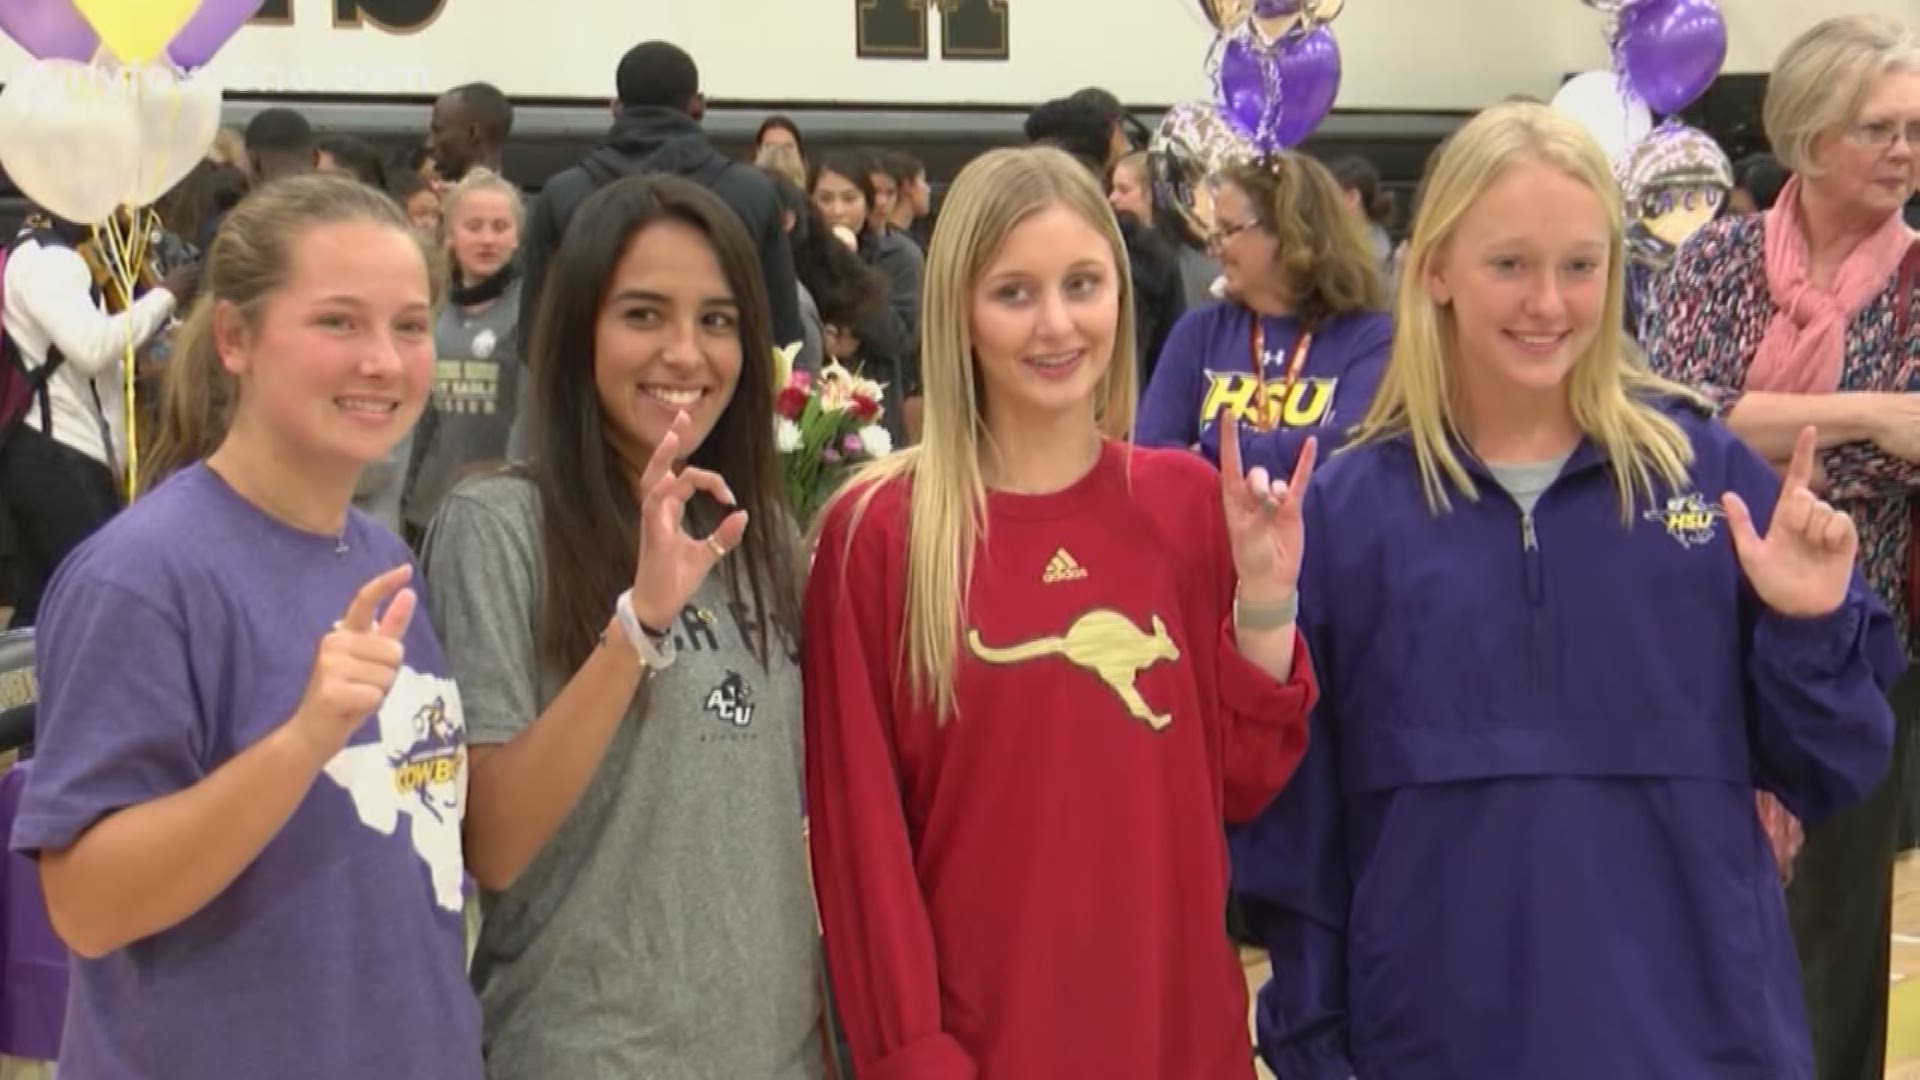 Several girls at Abilene High signed to play a variety of college sports. Lauren Schaeffer and Hannah Vermillion will play tennis at HSU. Allison Pierce will play volleyball at Austin College. And Estefany Hernandez will be close to home with the ACU soccer team. Congrats to all on their bright futures!